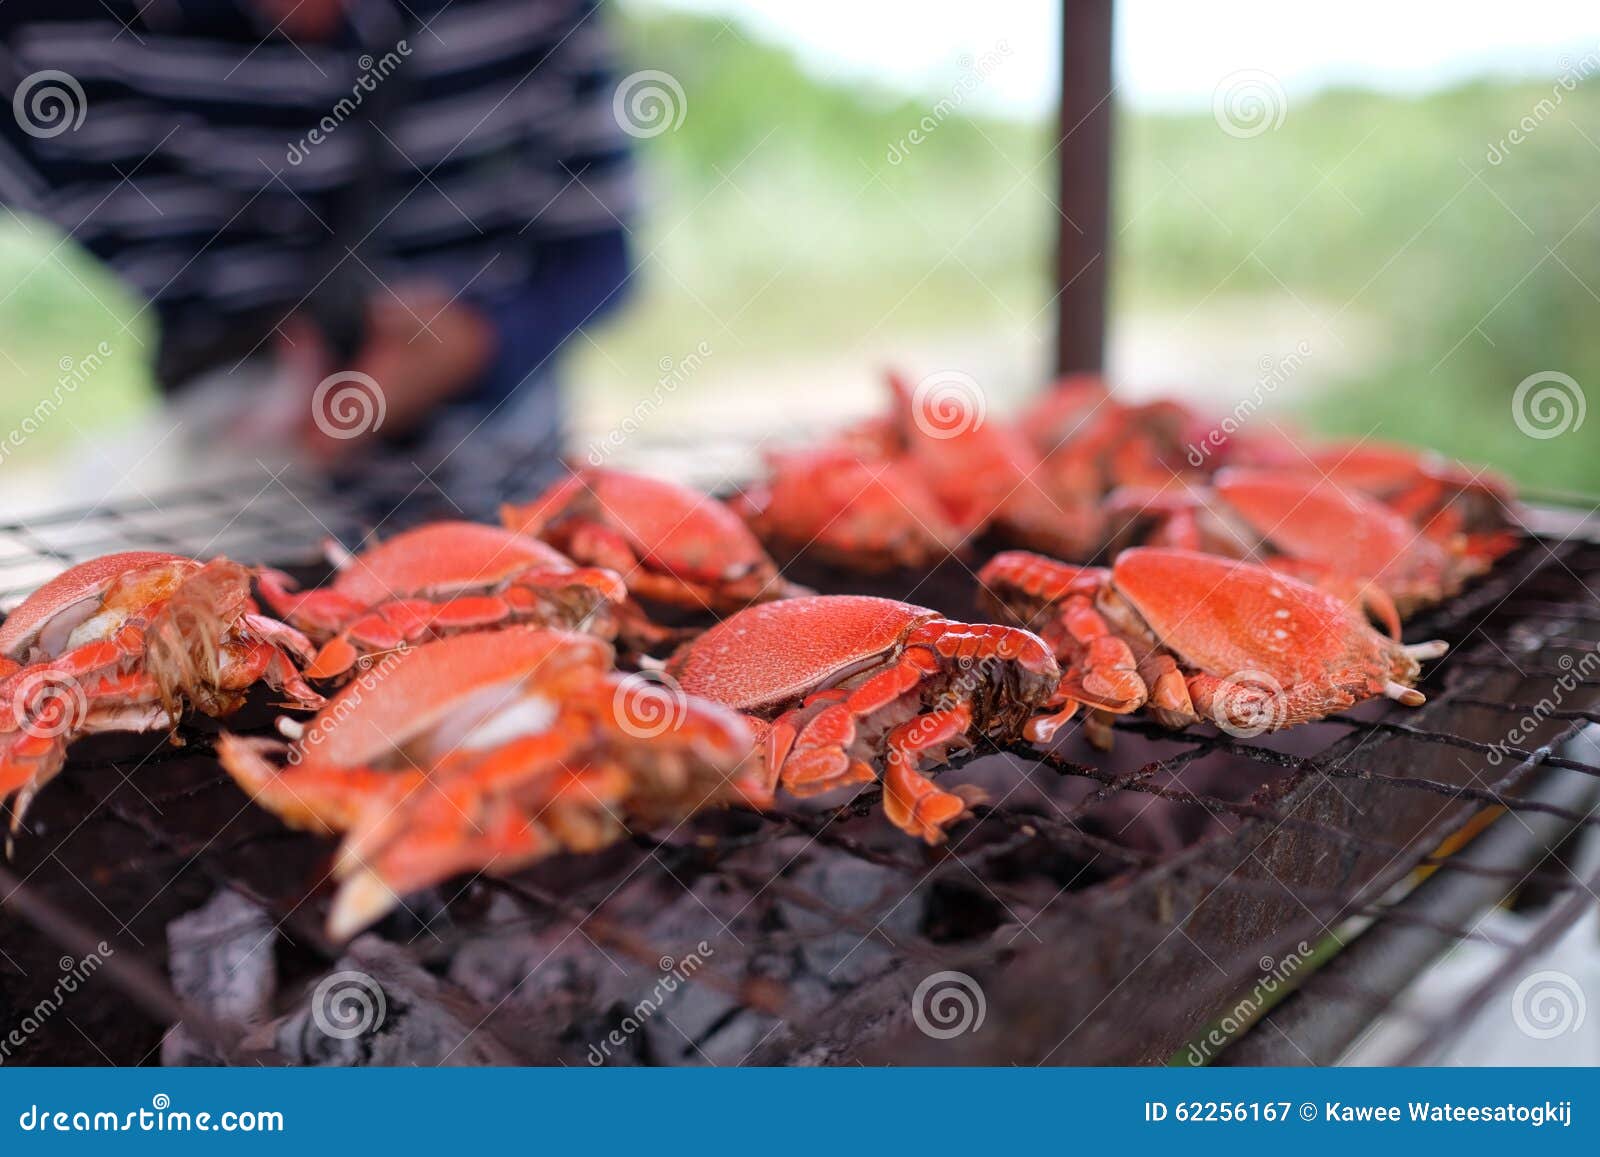 grilled spanner crab (red frog crab)